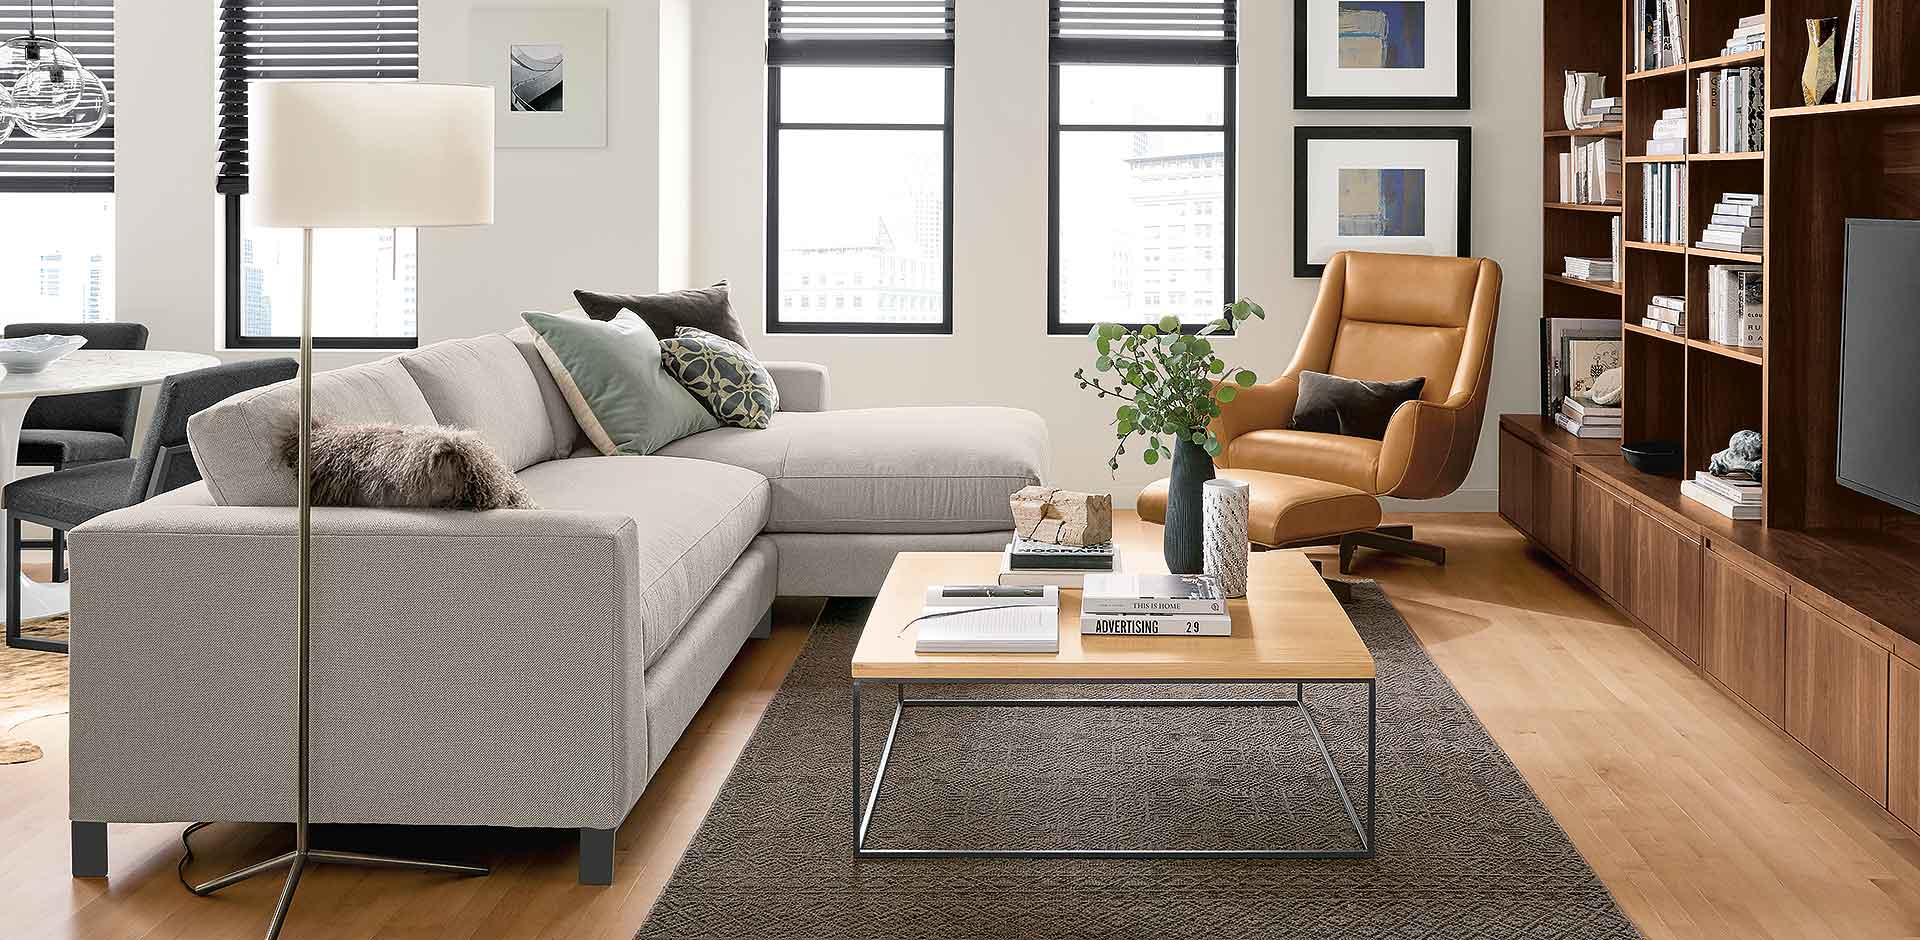 Decorating Ideas for a Small Living Room - Room & Board